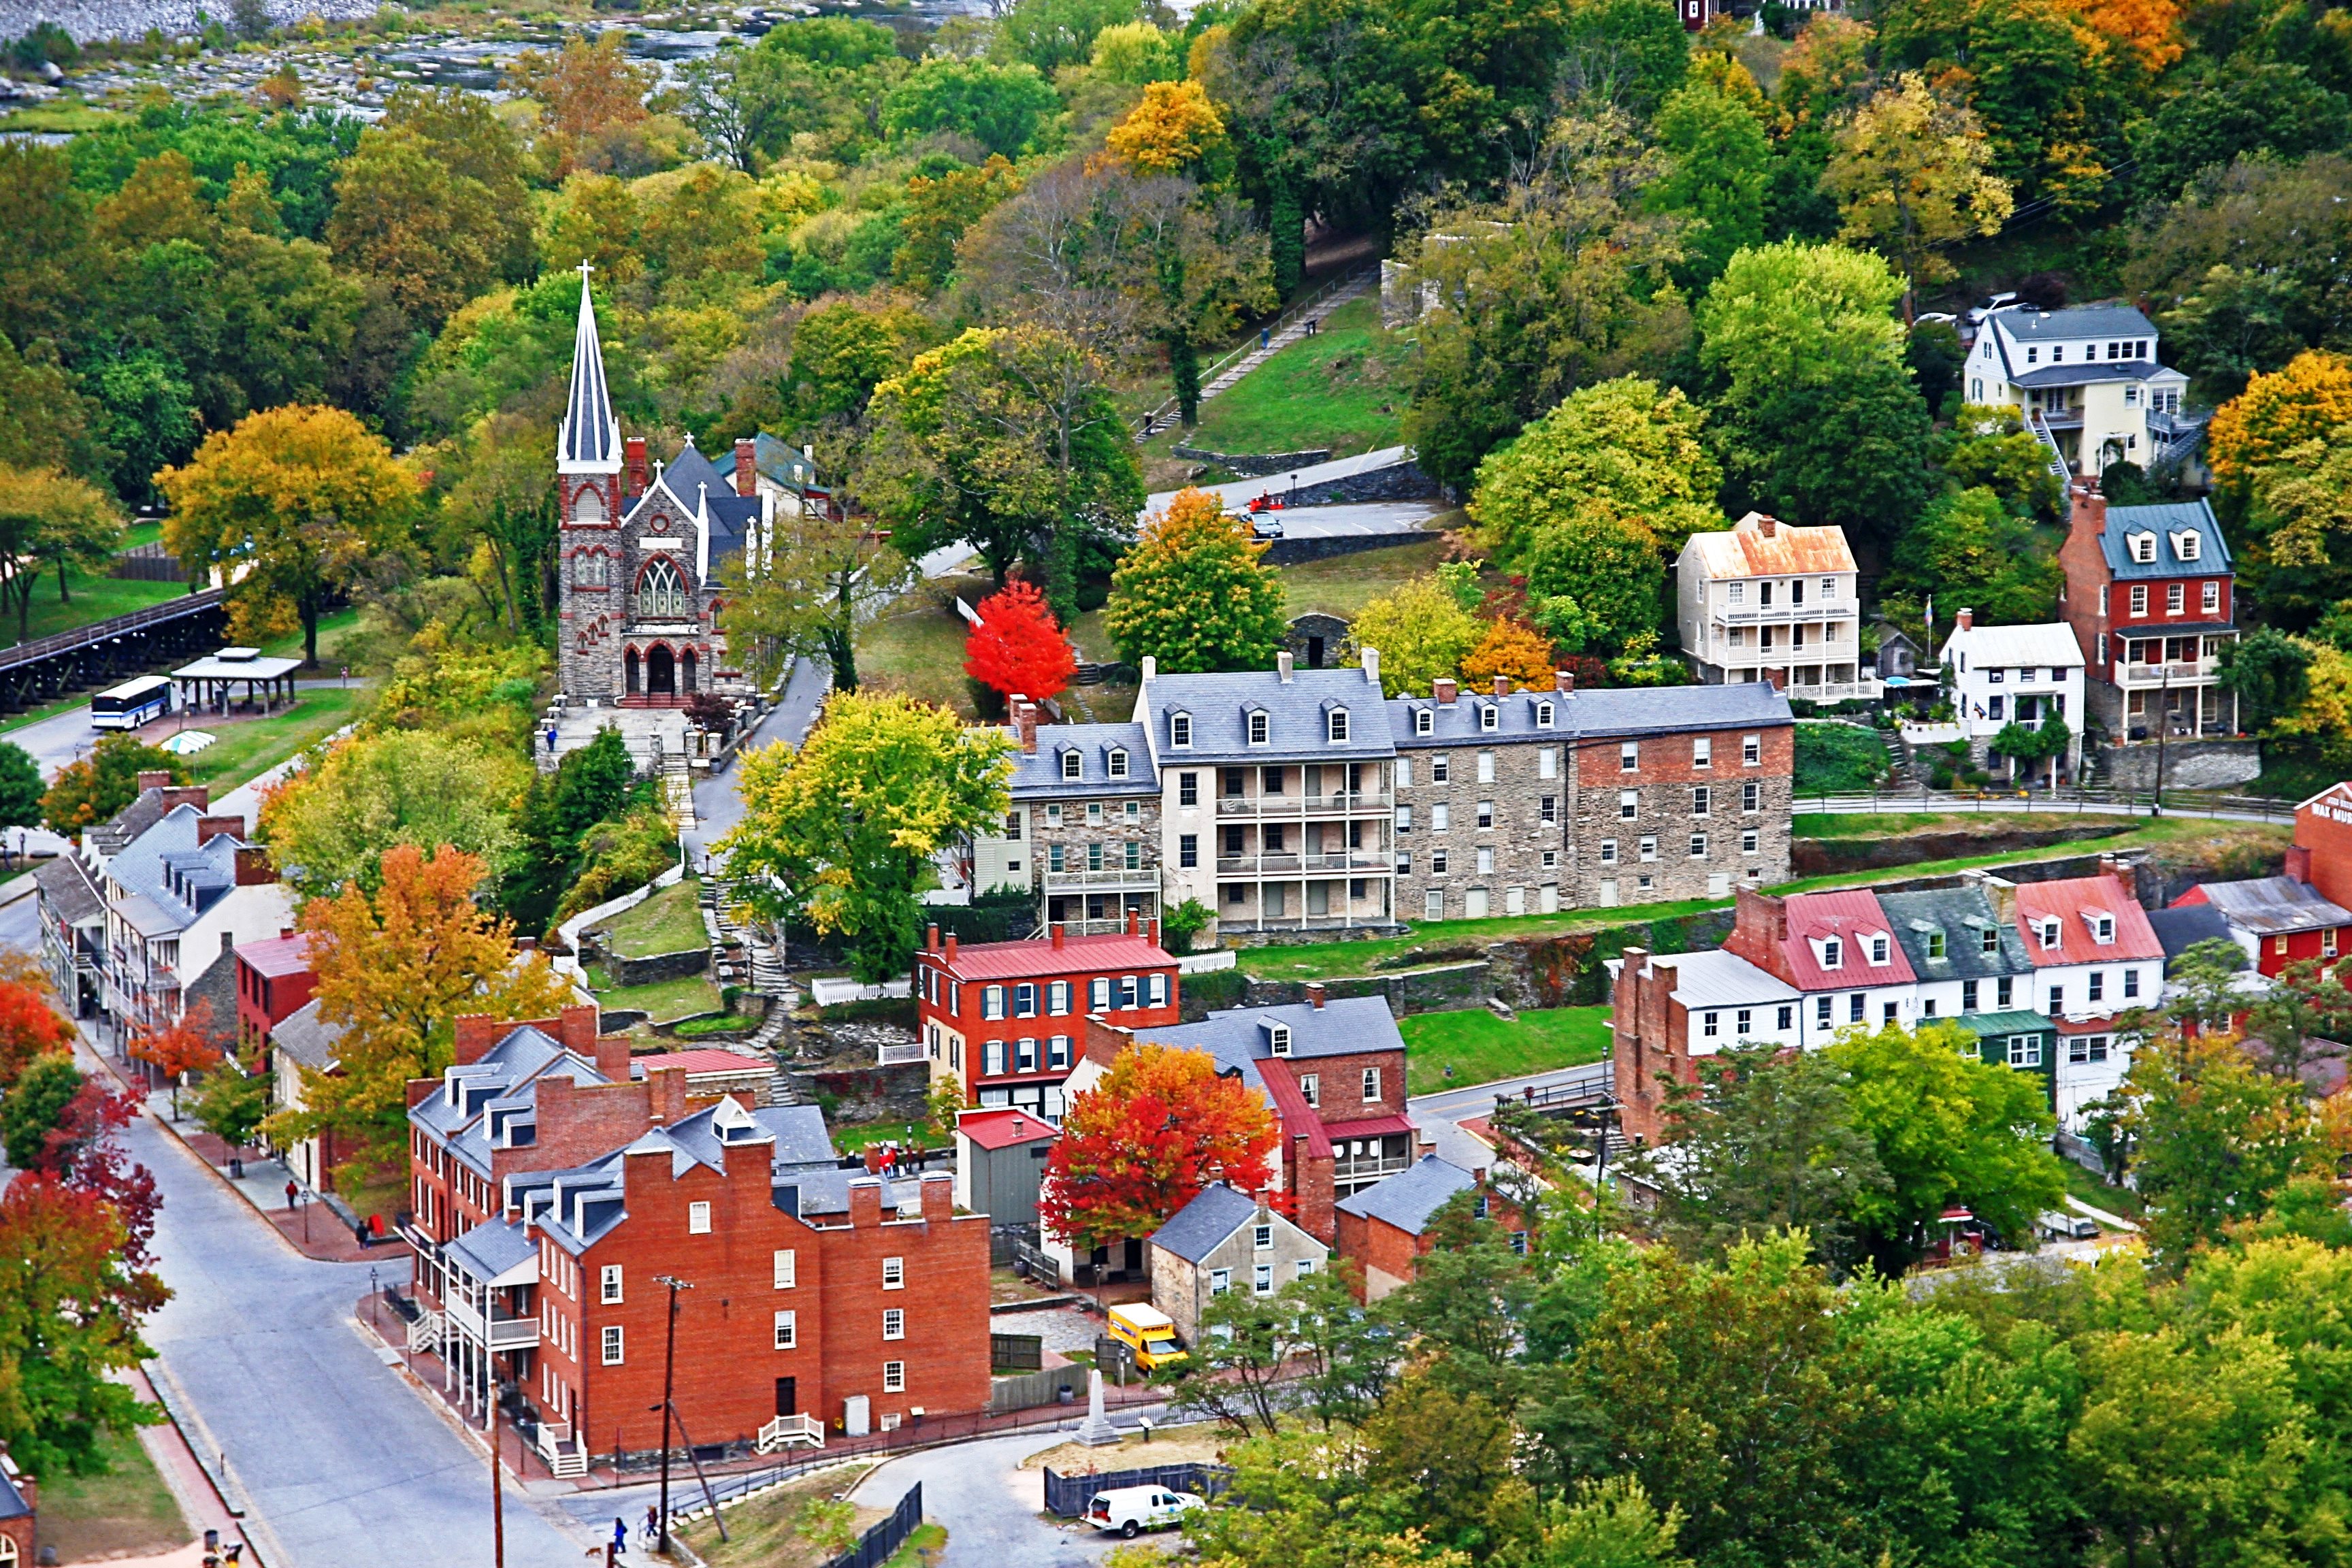 Wild, Wonderful West Virginia Encourages Travel to Harpers Ferry and